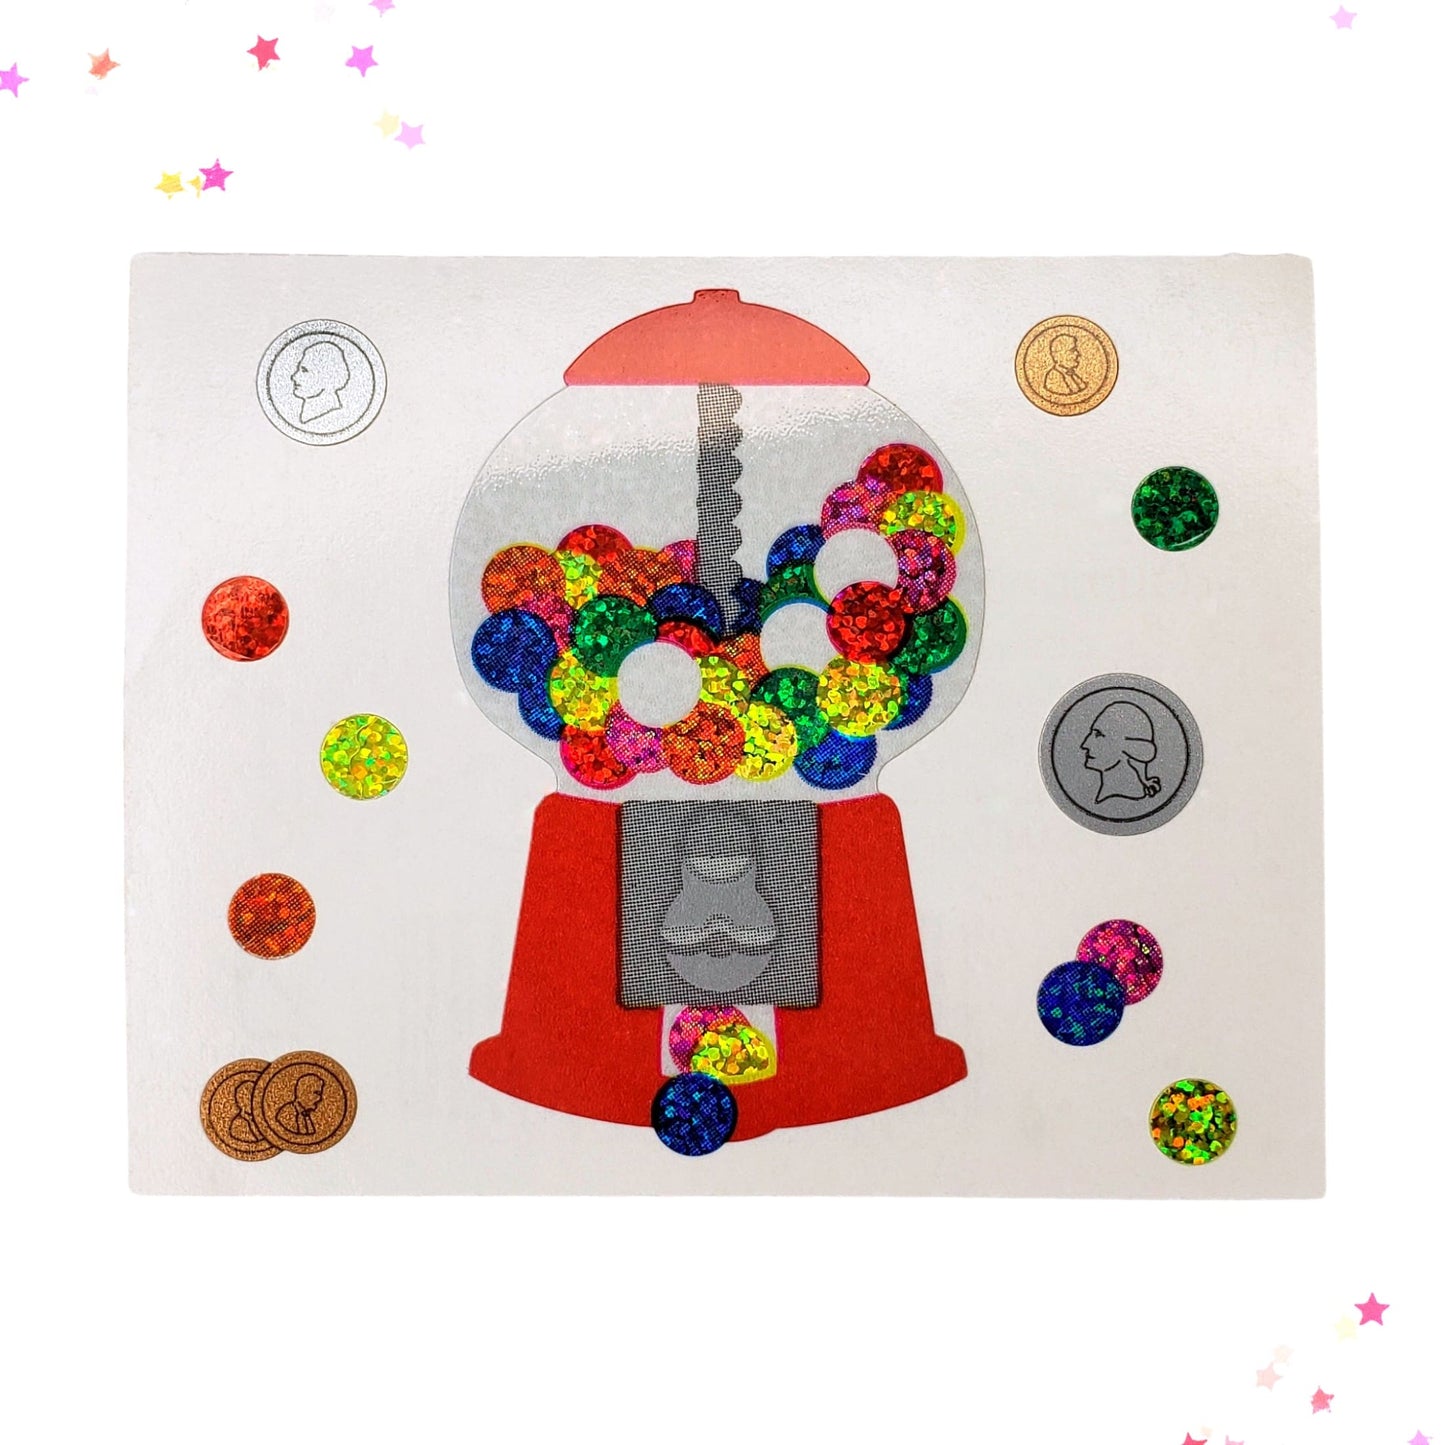 Premium Sticker - Gumball Machine from Confetti Kitty, Only 1.49